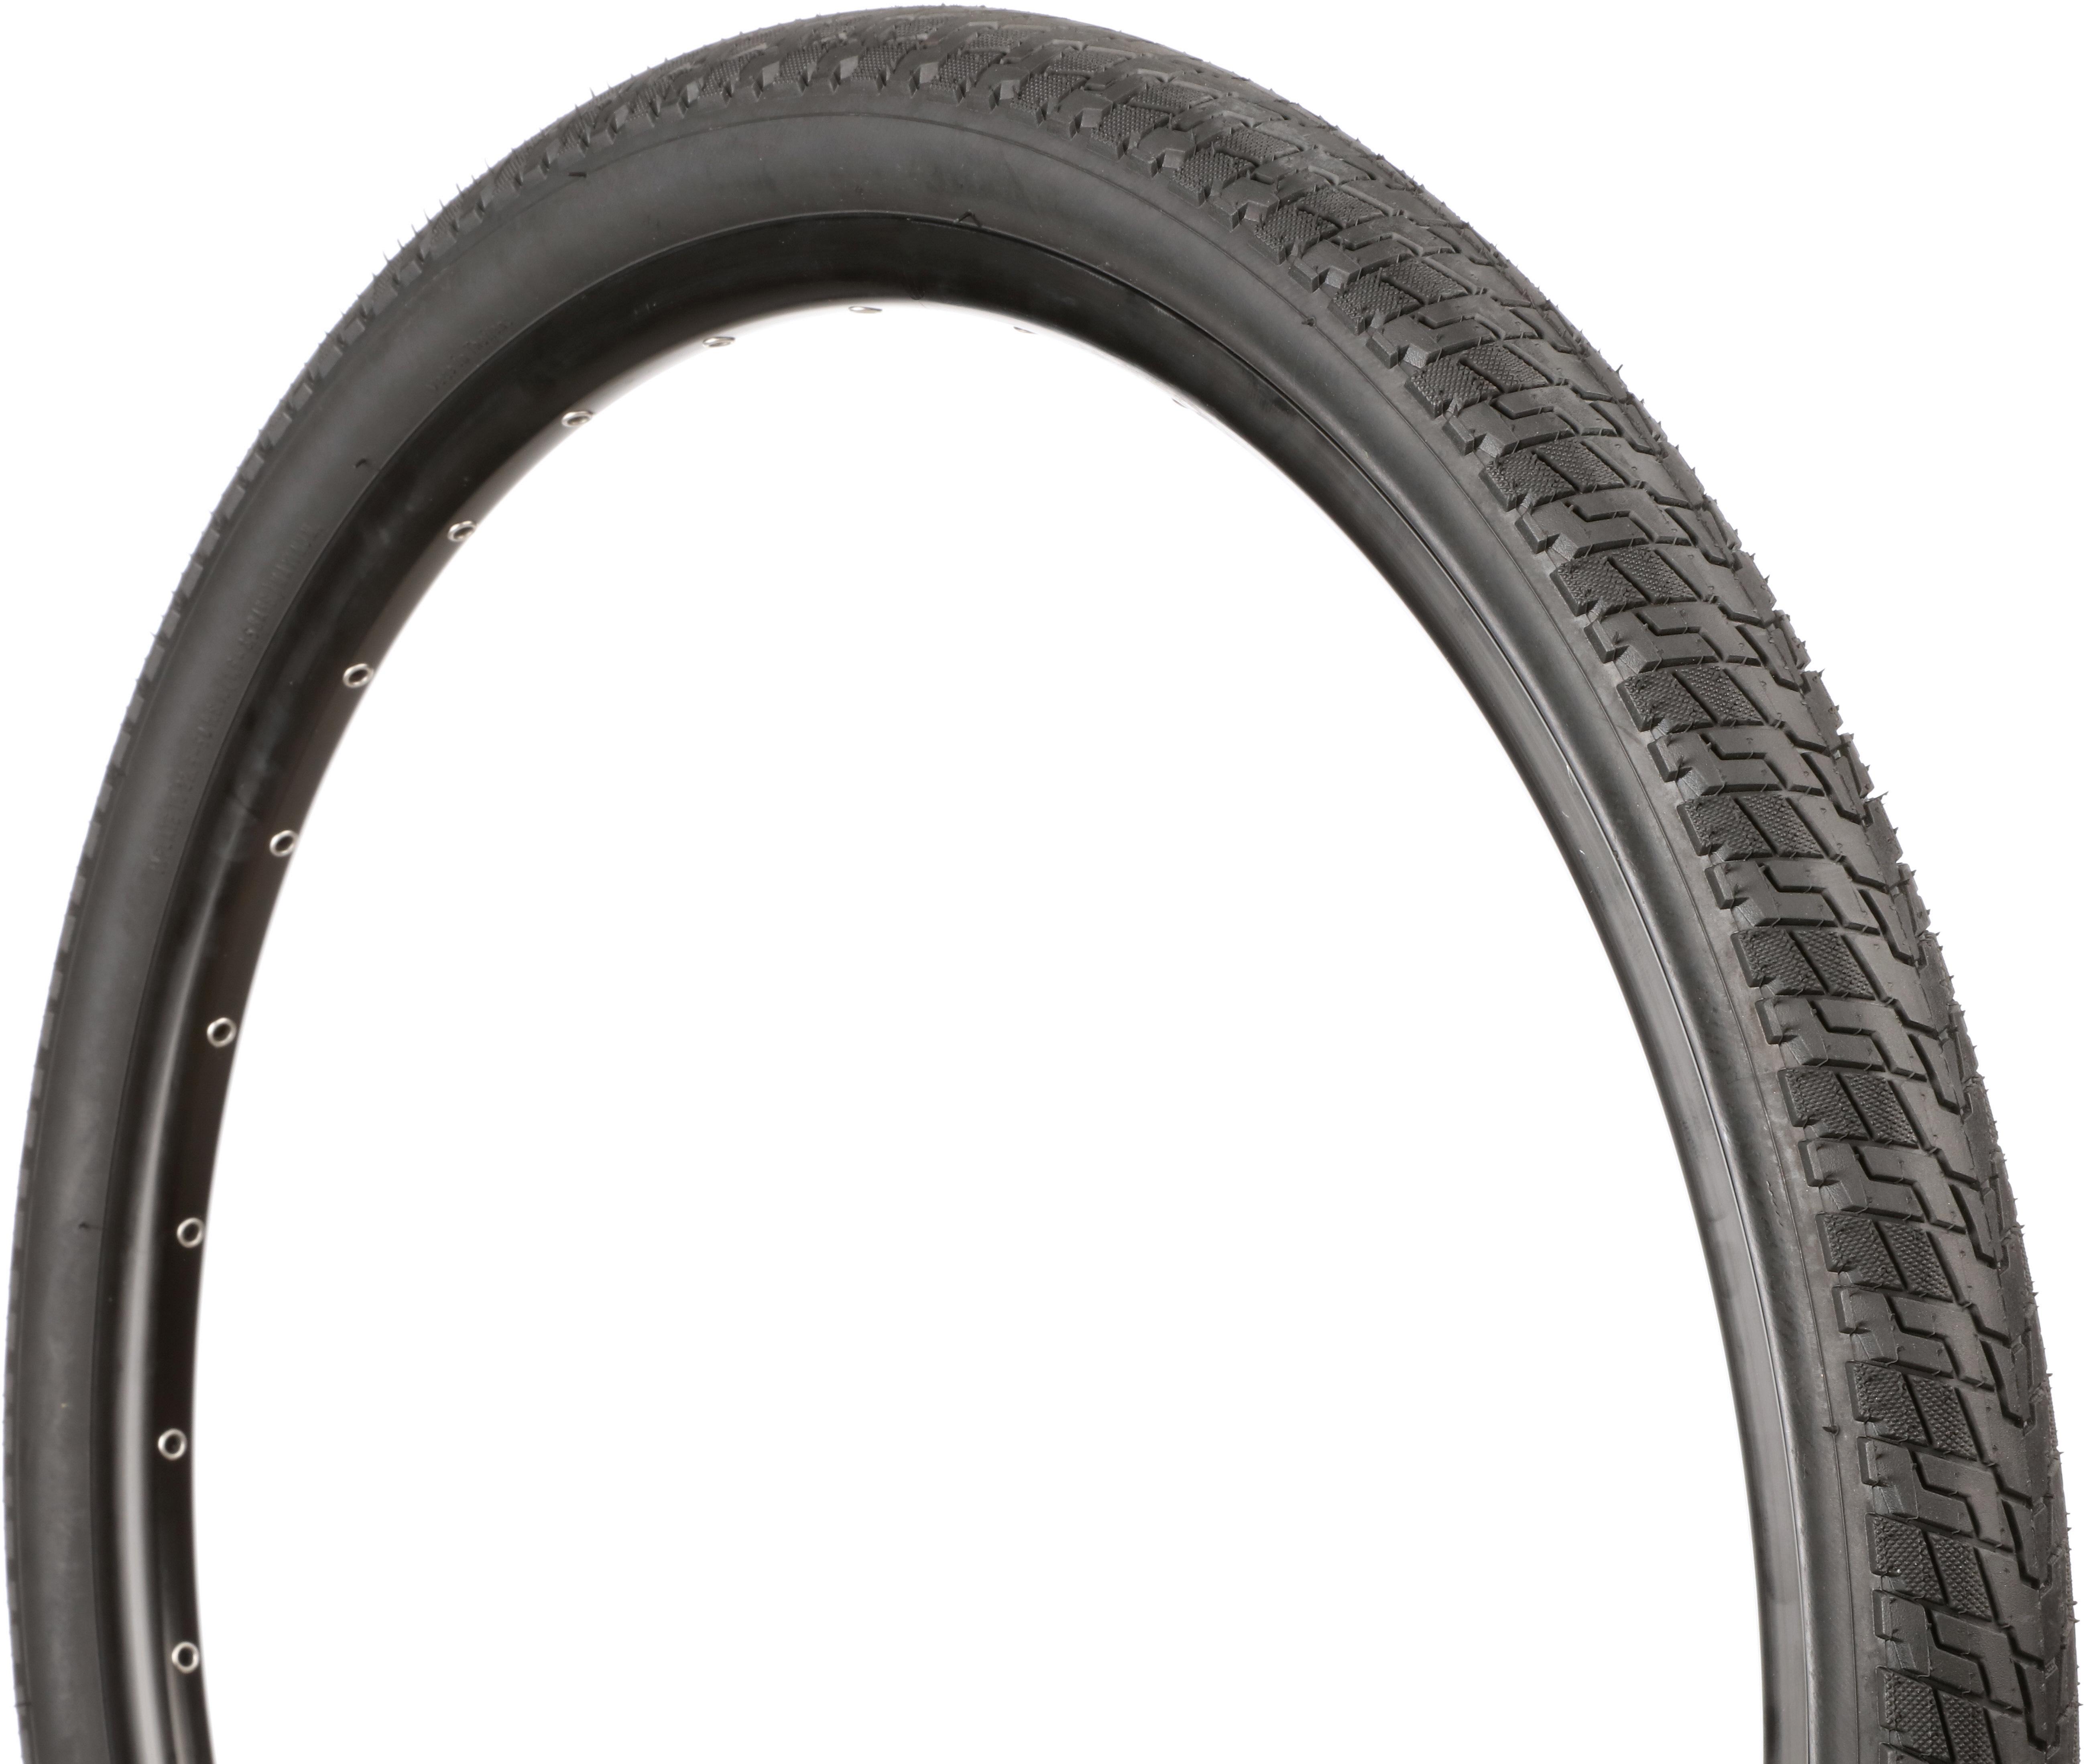 Halfords Hybrid Bike Tyre 27.5 X 1.75 With Puncture Protect